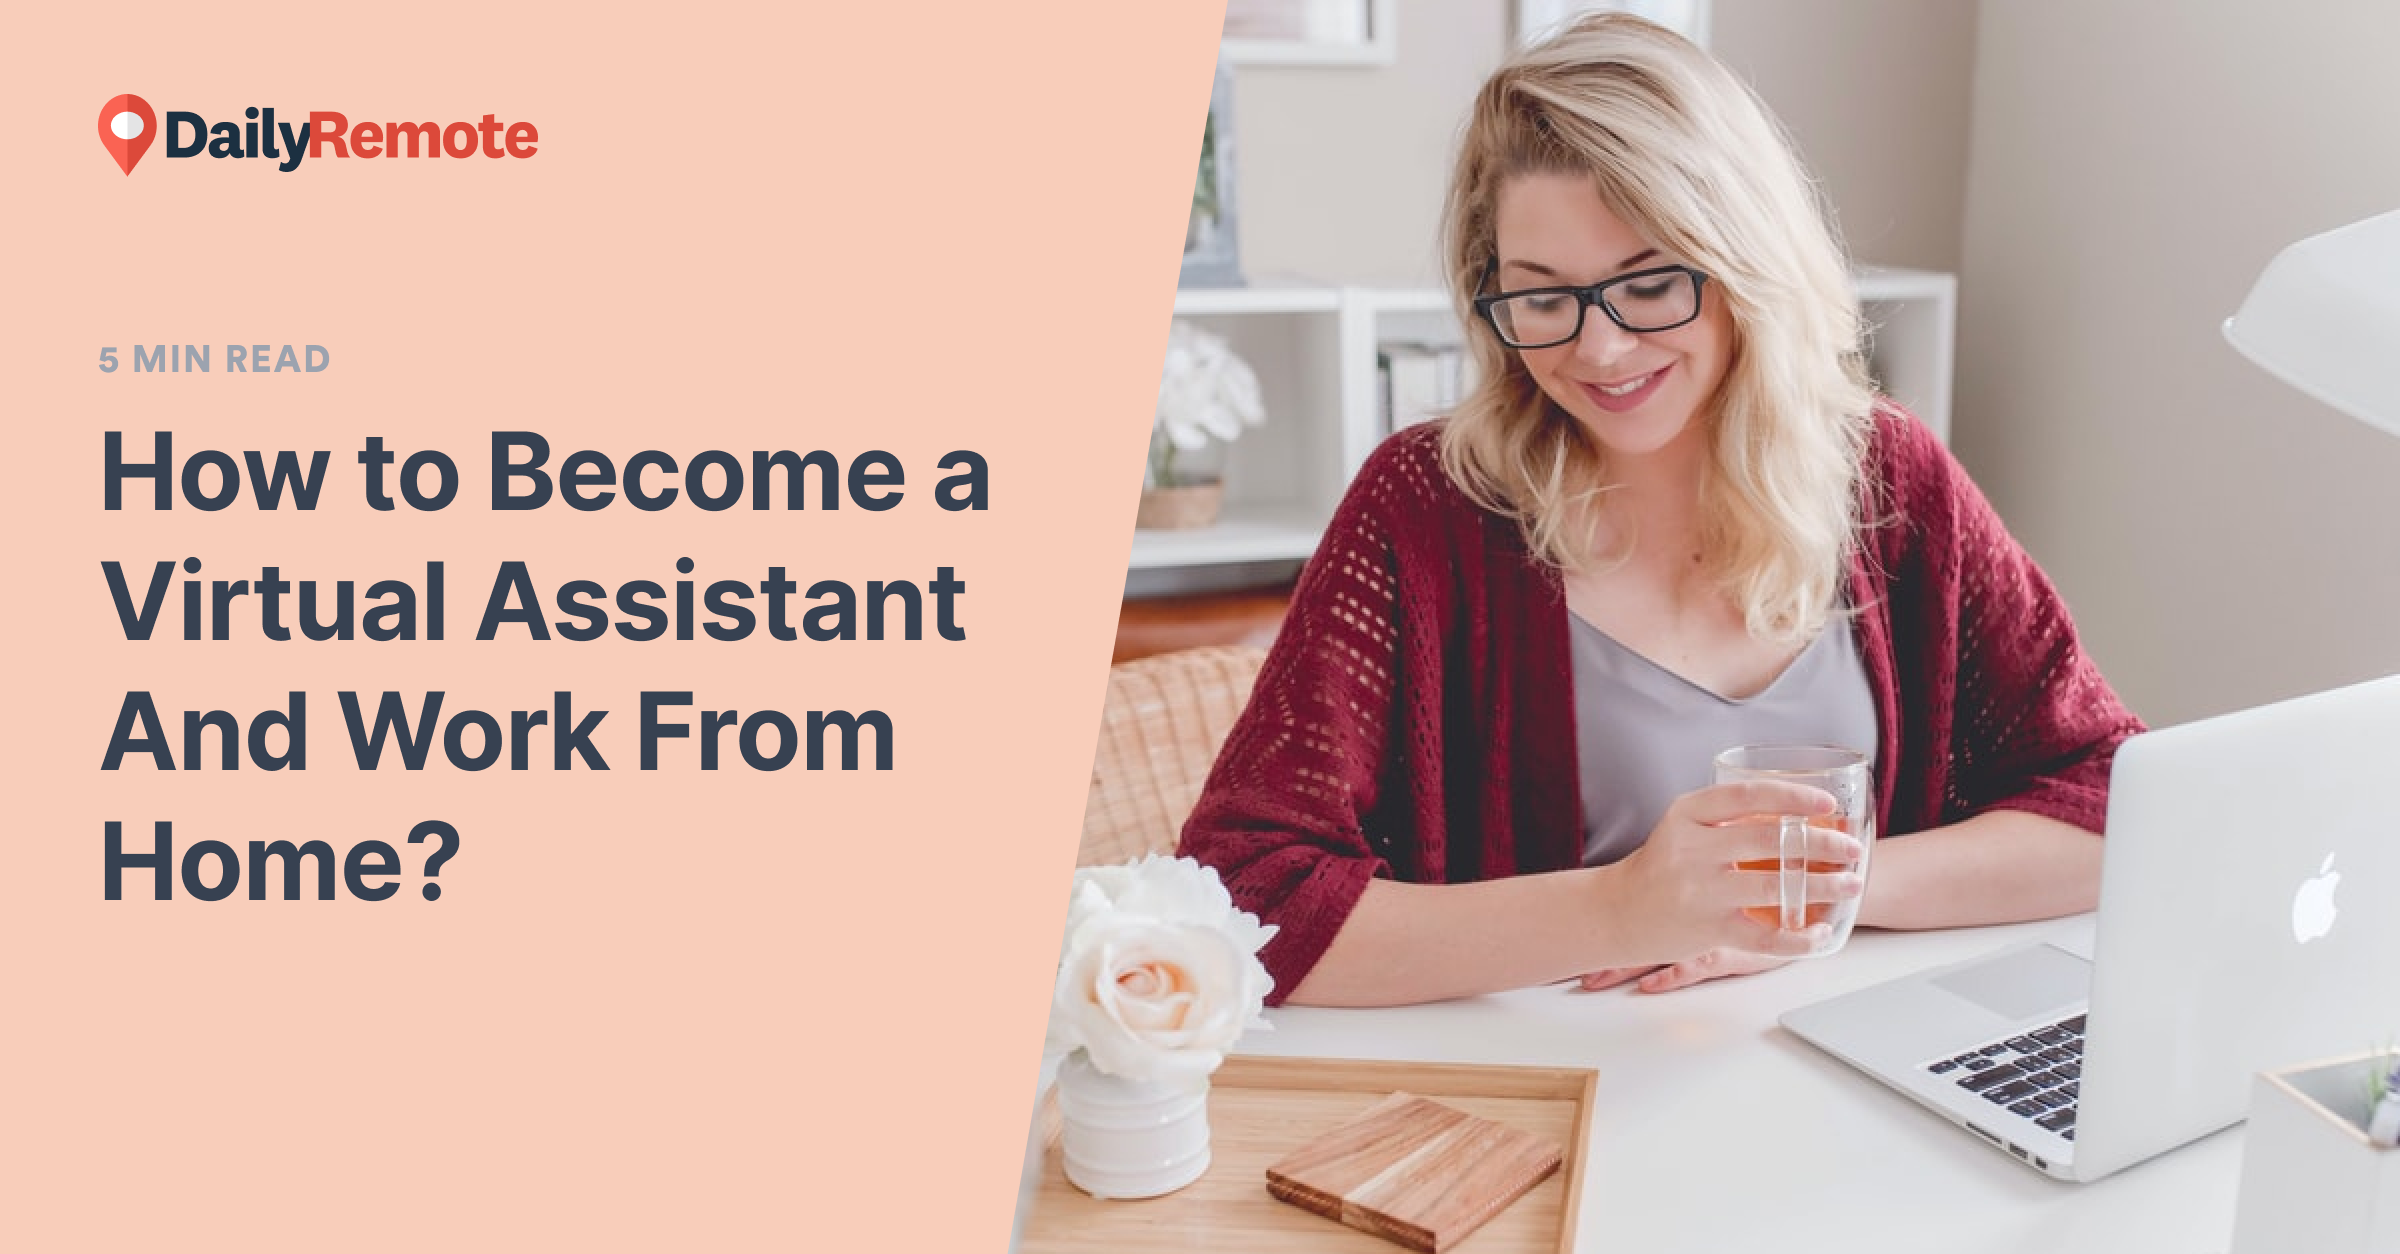 How to Become a Virtual Assistant And Work From Home?